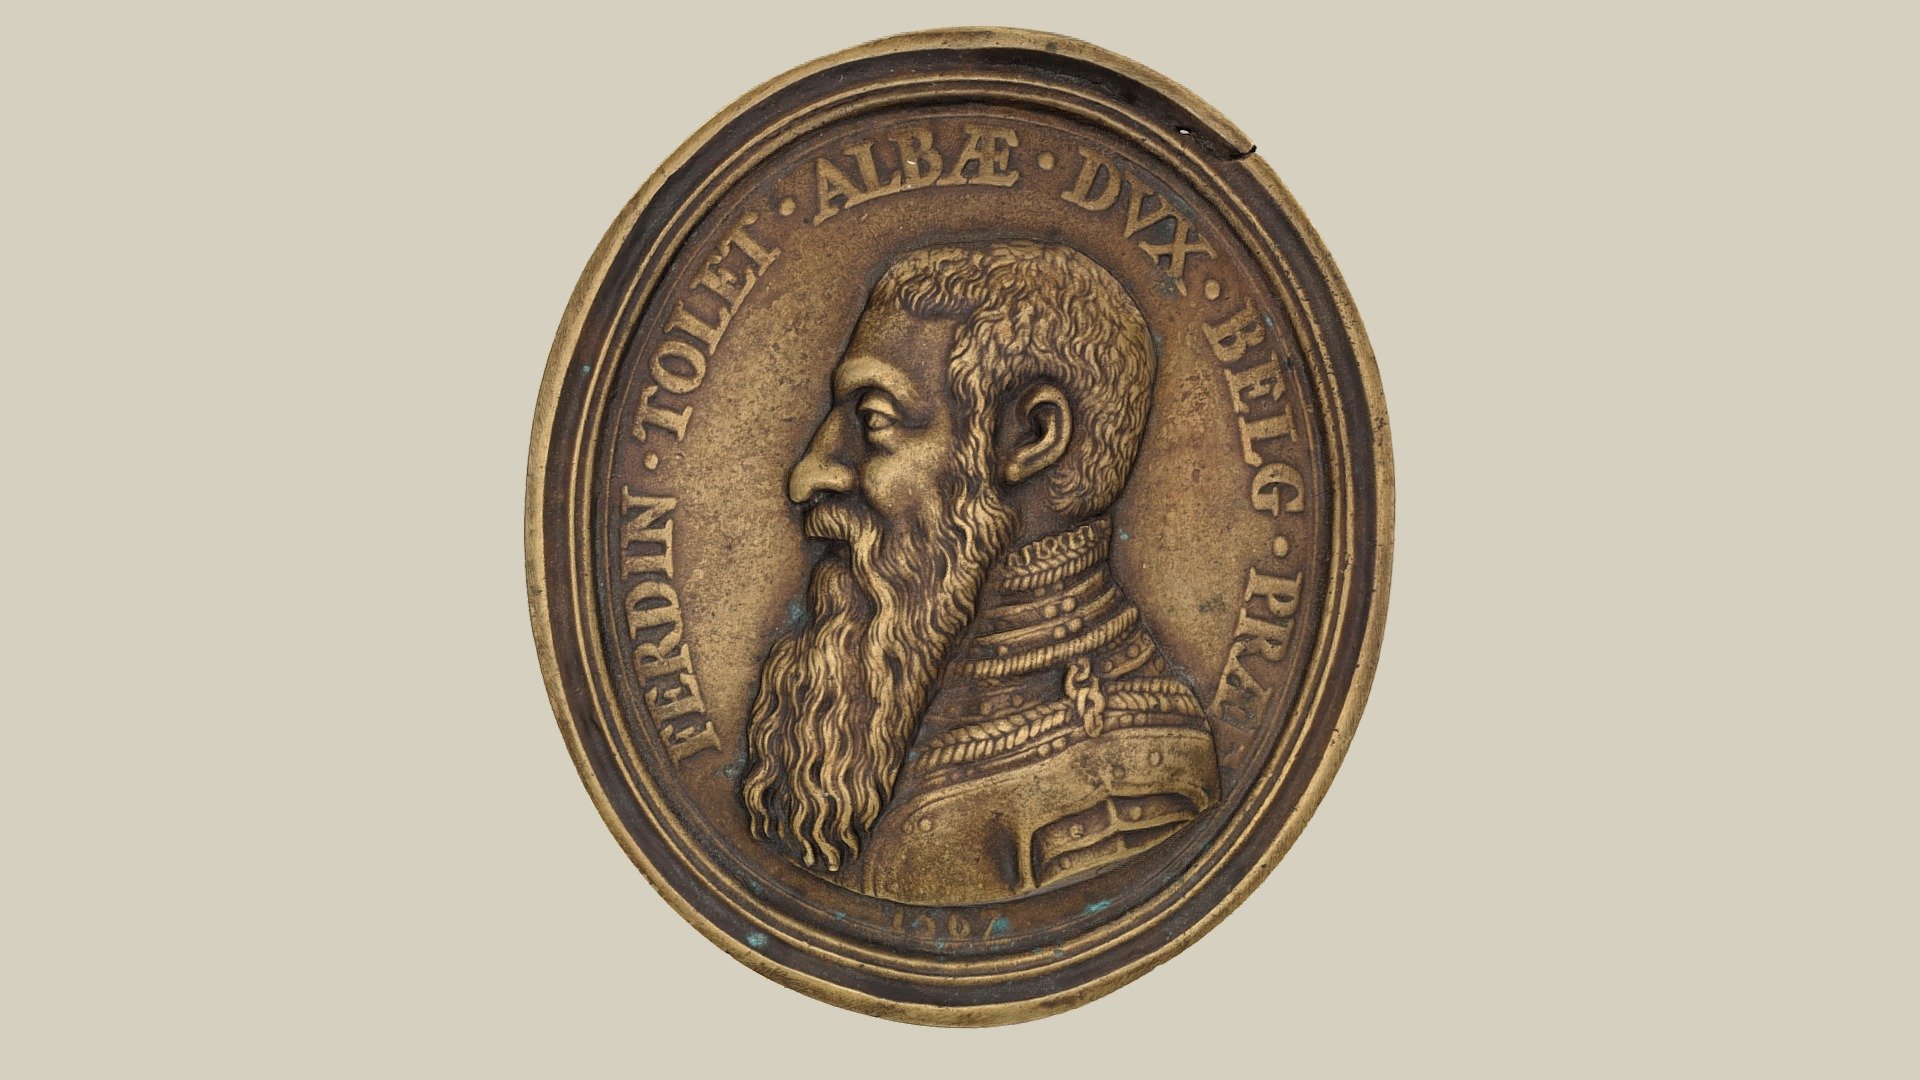 Oval bronze plaque on his governorship in the Netherlands in 1557, FERDIN TOLET ALBAE DVX BELG PRAEF// 1567, bust of the duke in armor. 83.4x96 mm; 74 g; 1567.

Fernando Álvarez de Toledo (1507-1582), 3rd Duke of Alba was a Spanish nobleman, general and statesman. In the Netherlands he suppressed the rebellion against Spanish rule during the Eighty Years' War. He was governor of the Spanish Netherlands from 1567 to 1573. He is still revered by some Spaniards as a great and successful warlord. Outside Spain, he is often regarded as the &ldquo;executioner of the Netherlands.